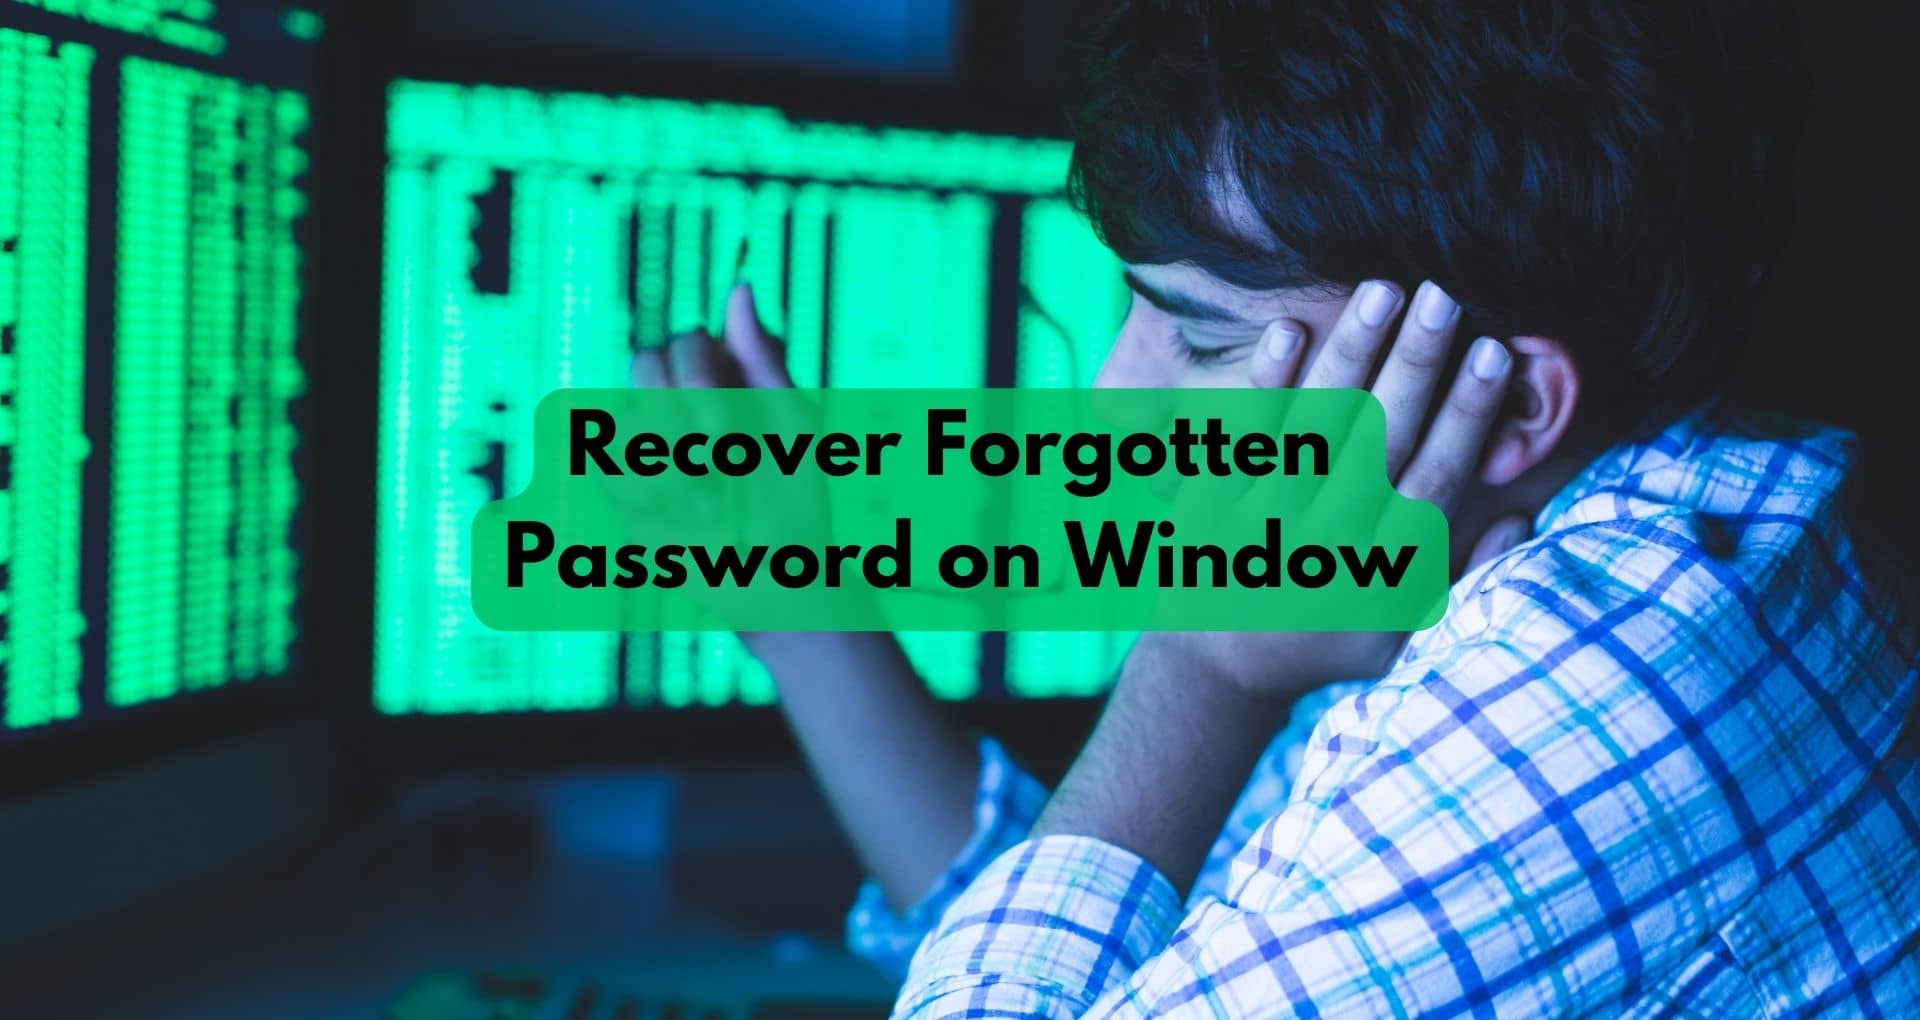 5 Easy Steps to Recover Forgotten Password on Windows